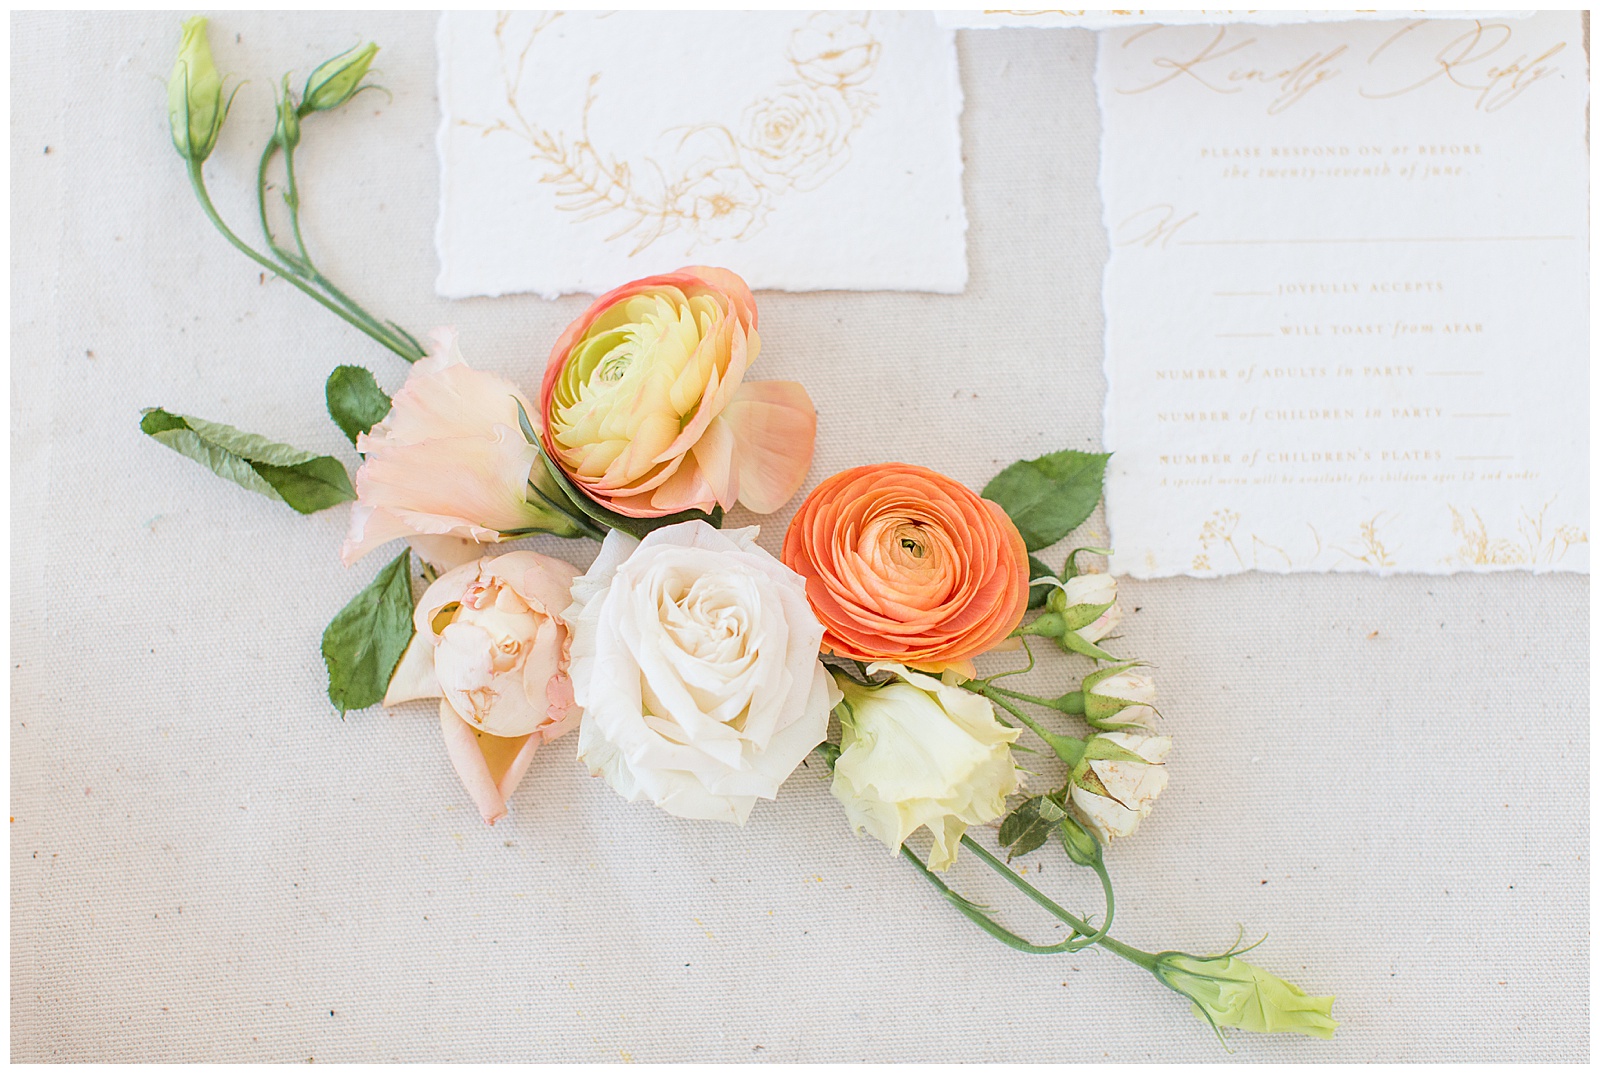 flowers and wedding invitation details 